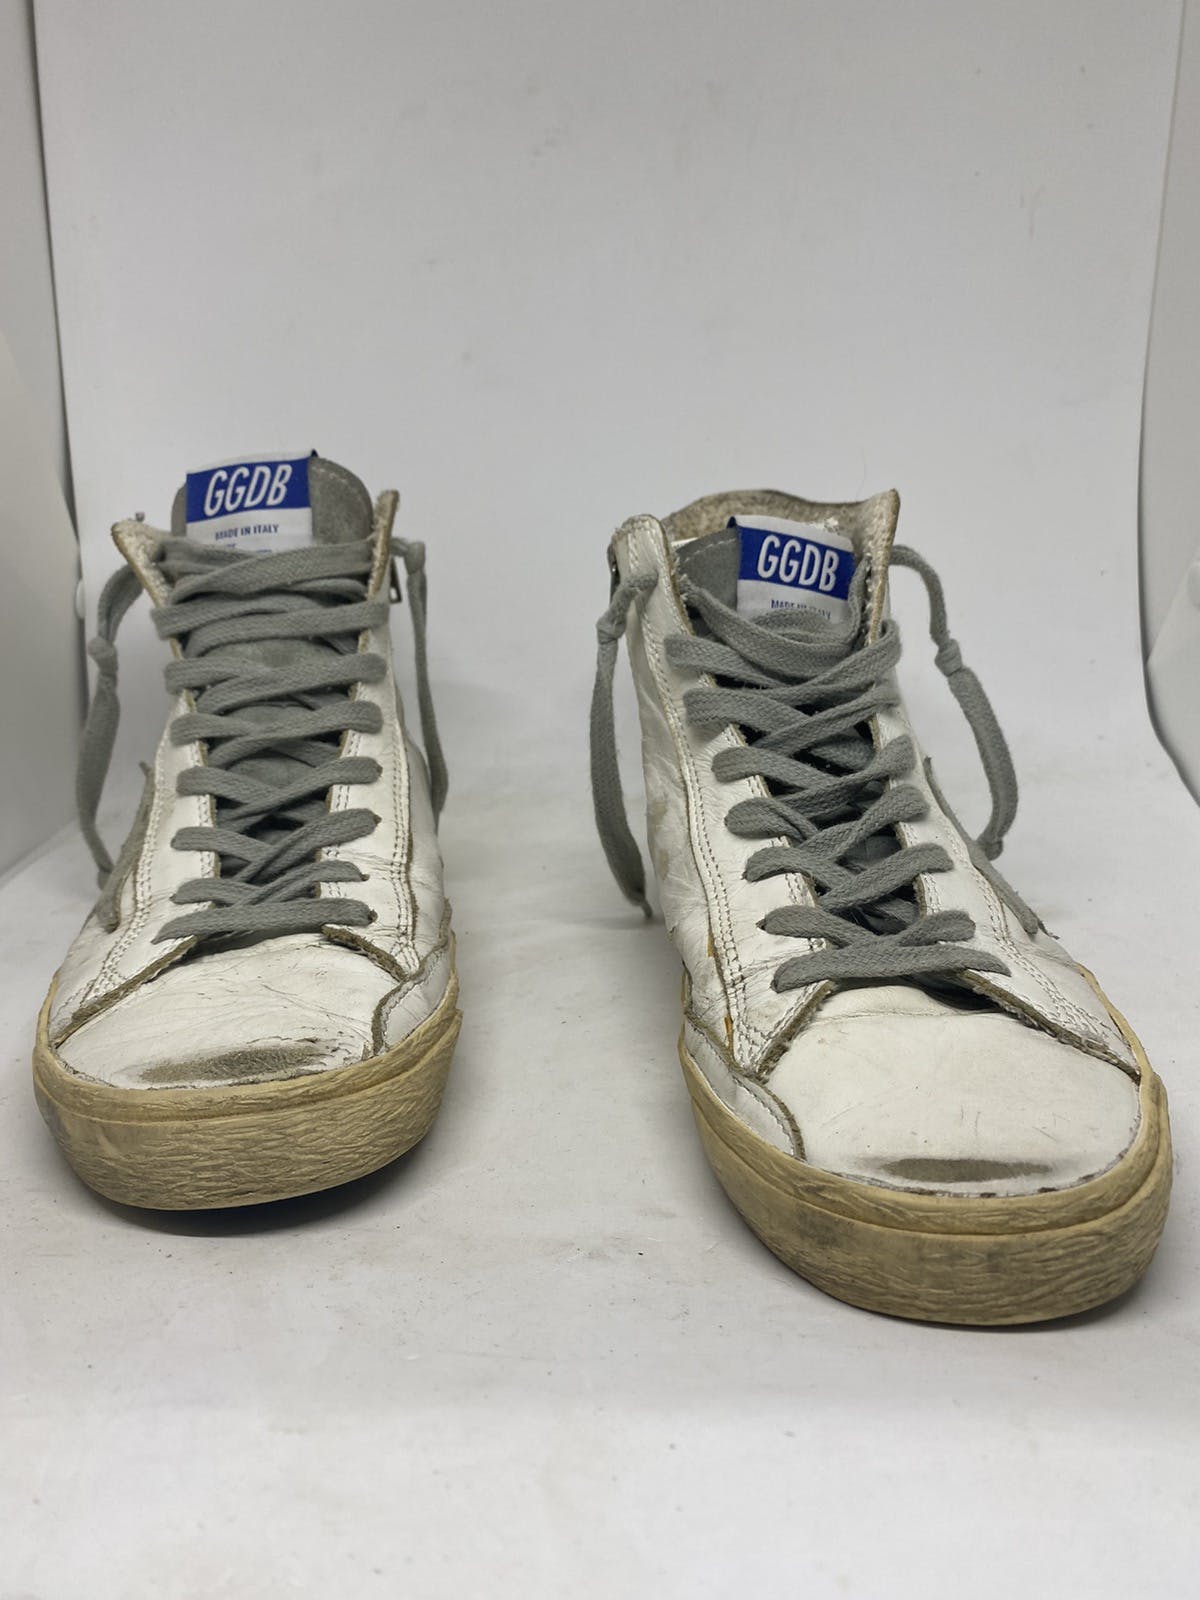 Golden Goose Francy suede patch sneakers size 36 - 1